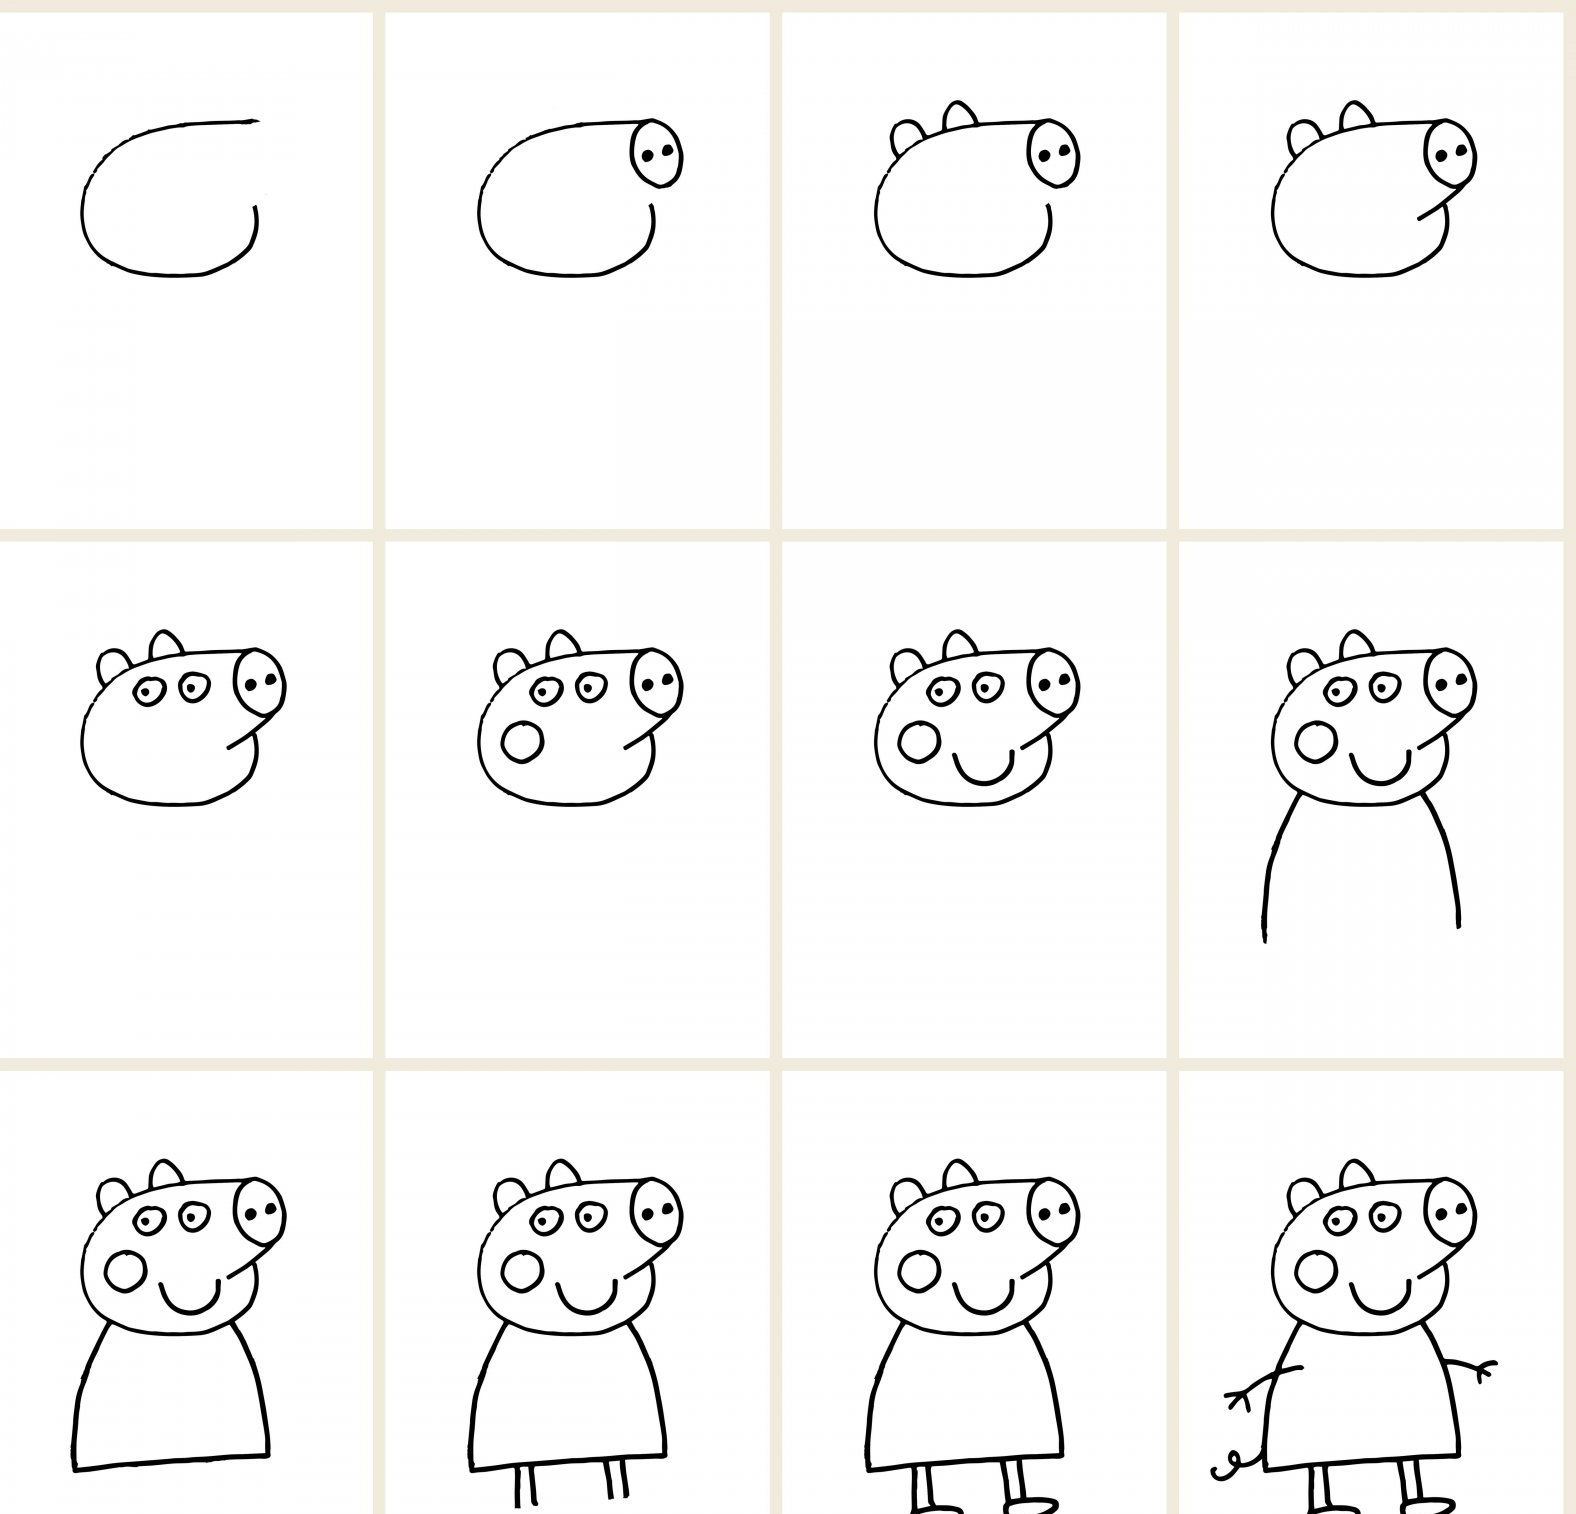 How to Draw a Pig for kids